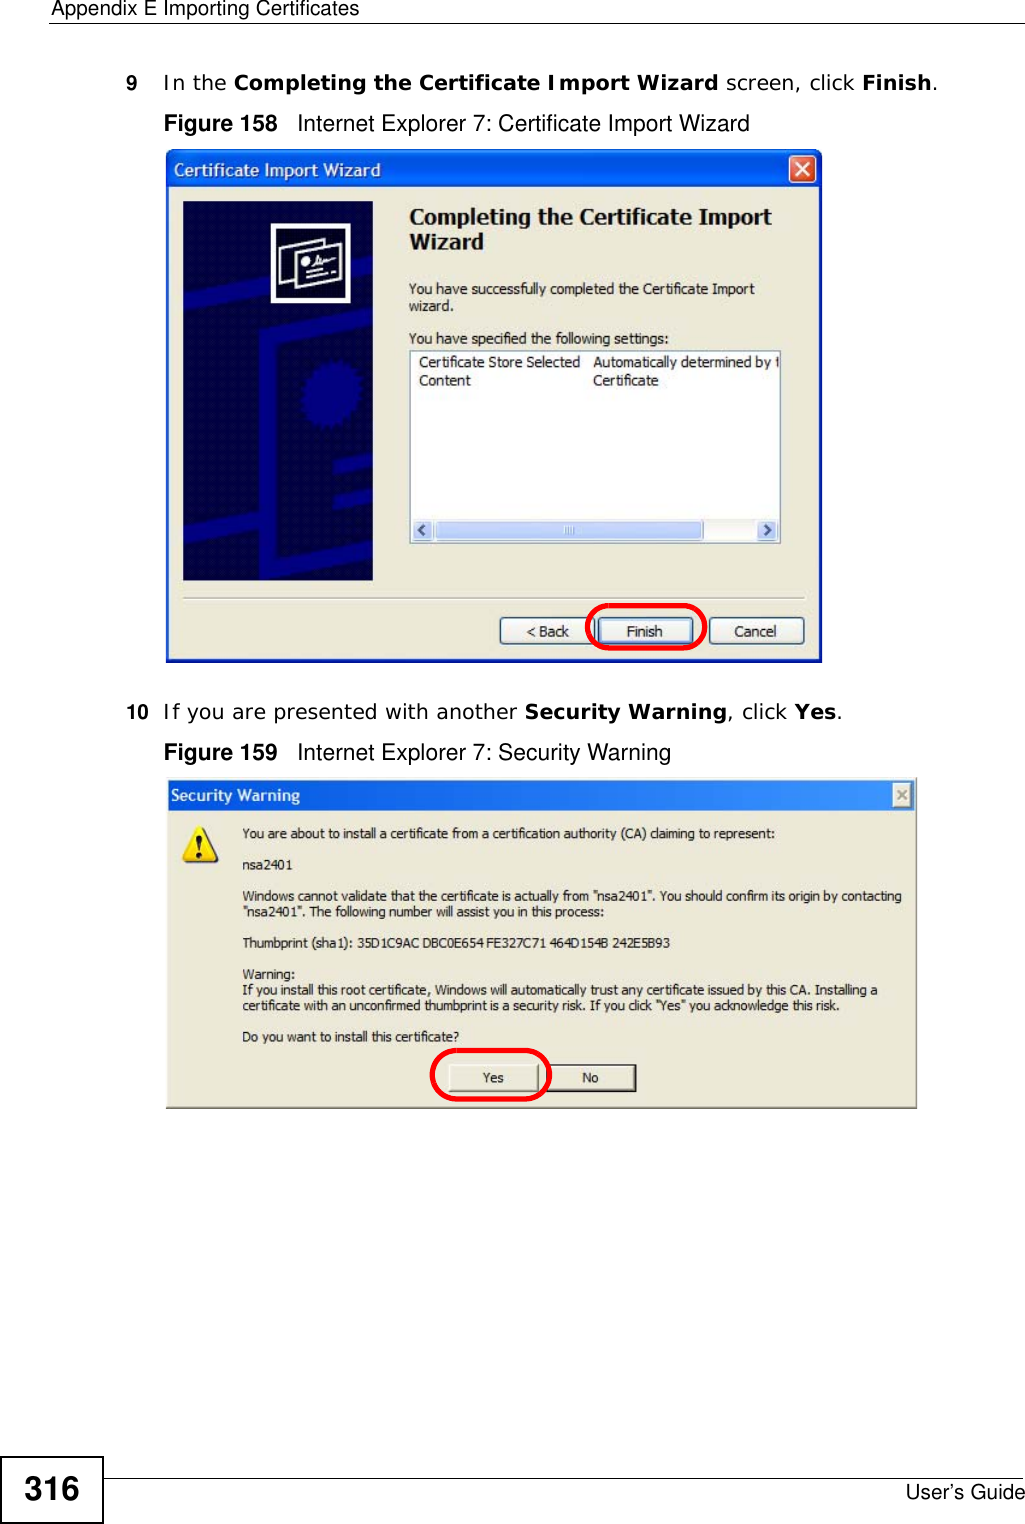 Appendix E Importing CertificatesUser’s Guide3169In the Completing the Certificate Import Wizard screen, click Finish.Figure 158   Internet Explorer 7: Certificate Import Wizard10 If you are presented with another Security Warning, click Yes.Figure 159   Internet Explorer 7: Security Warning